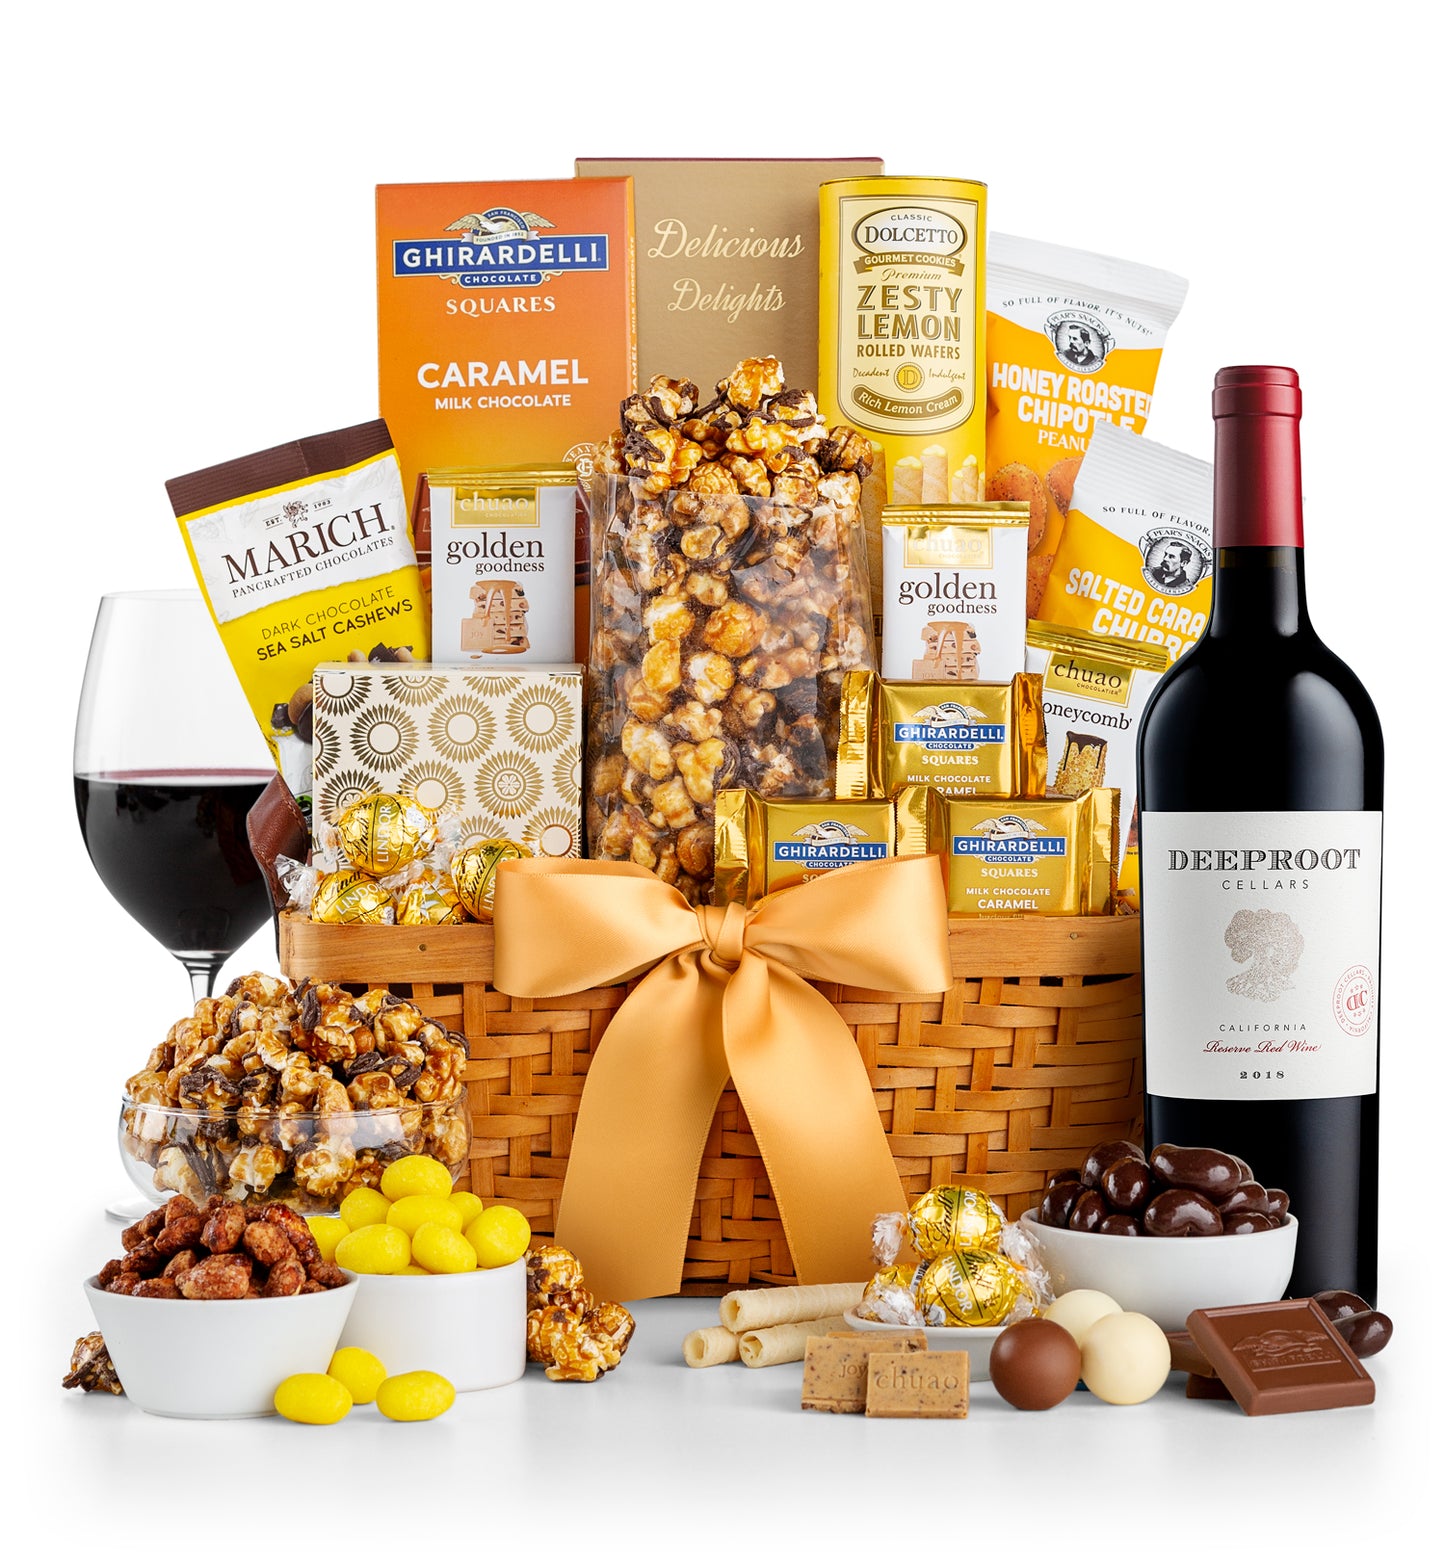 As Good As Gold Gift Basket with DeepRoot Cabernet Sauvignon